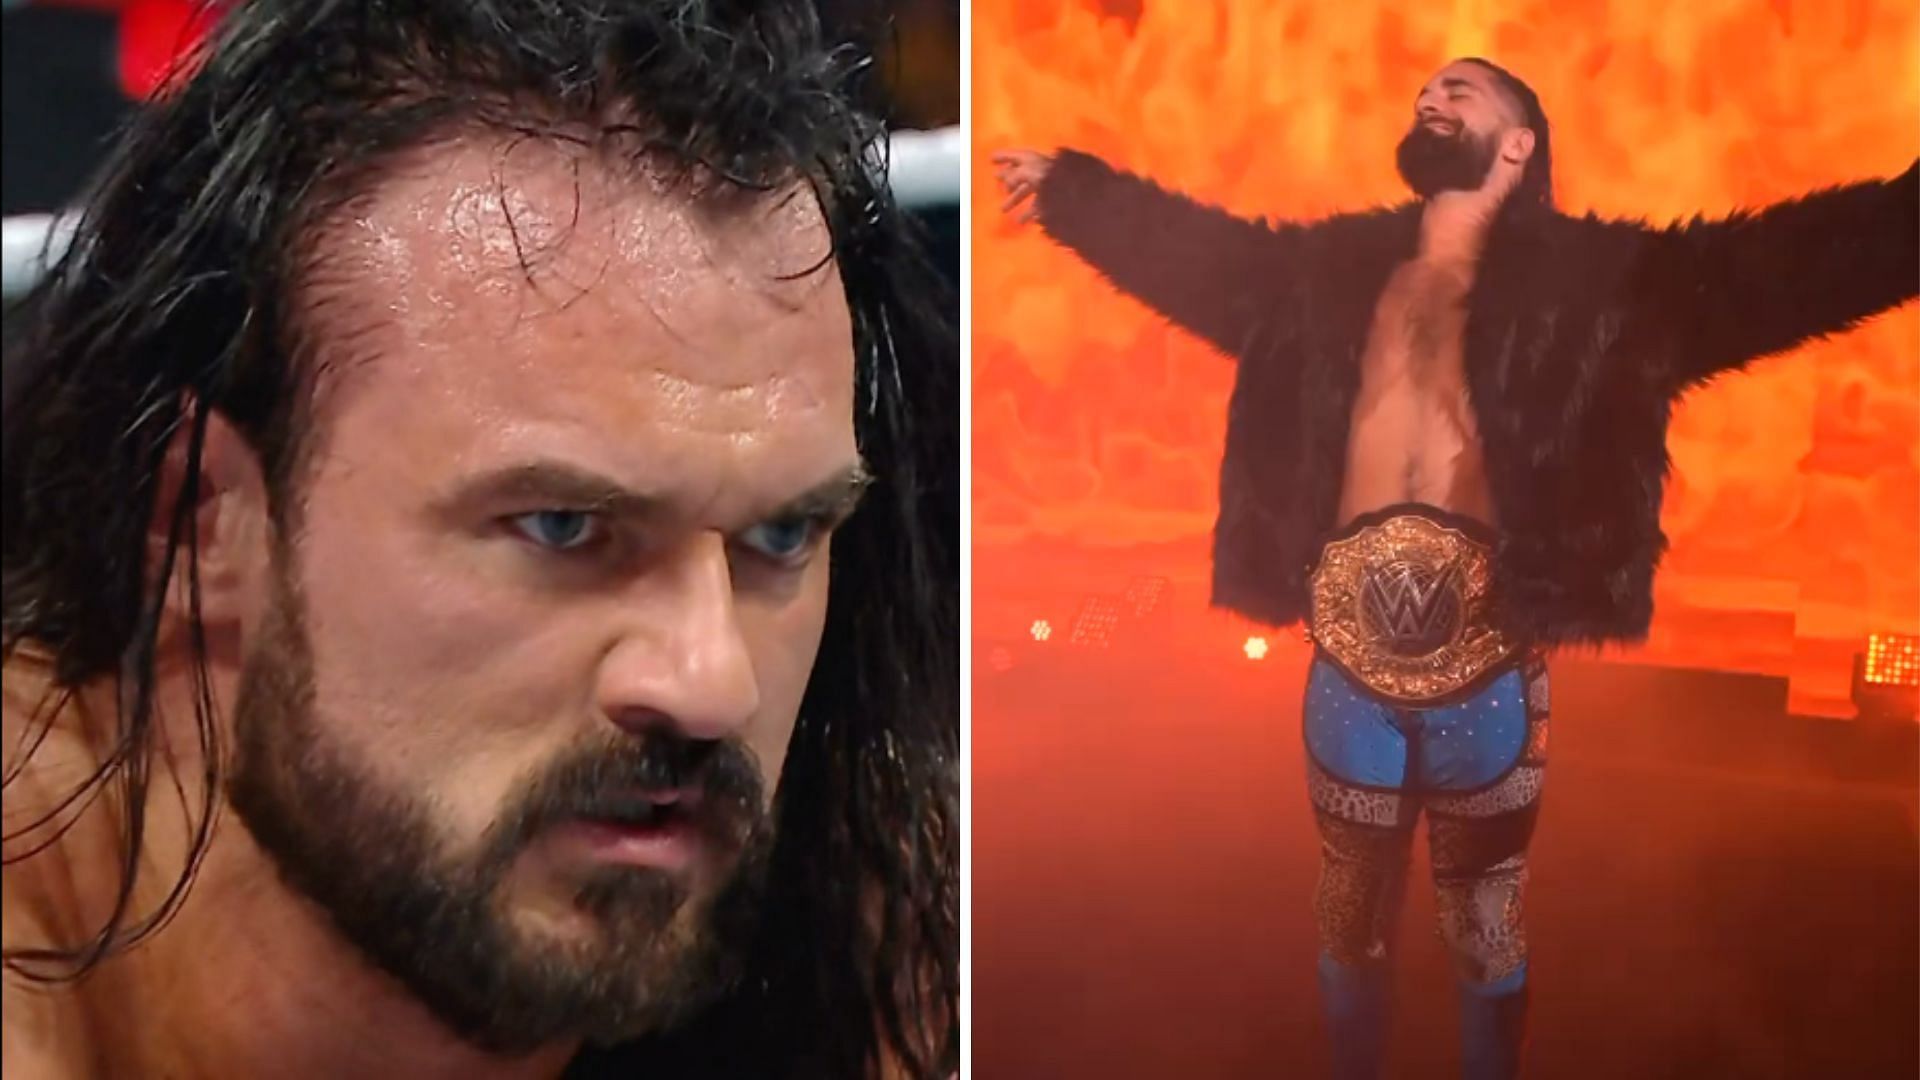 Drew McIntyre is set to face Seth Rollins at WrestleMania XL [Image credits: stars